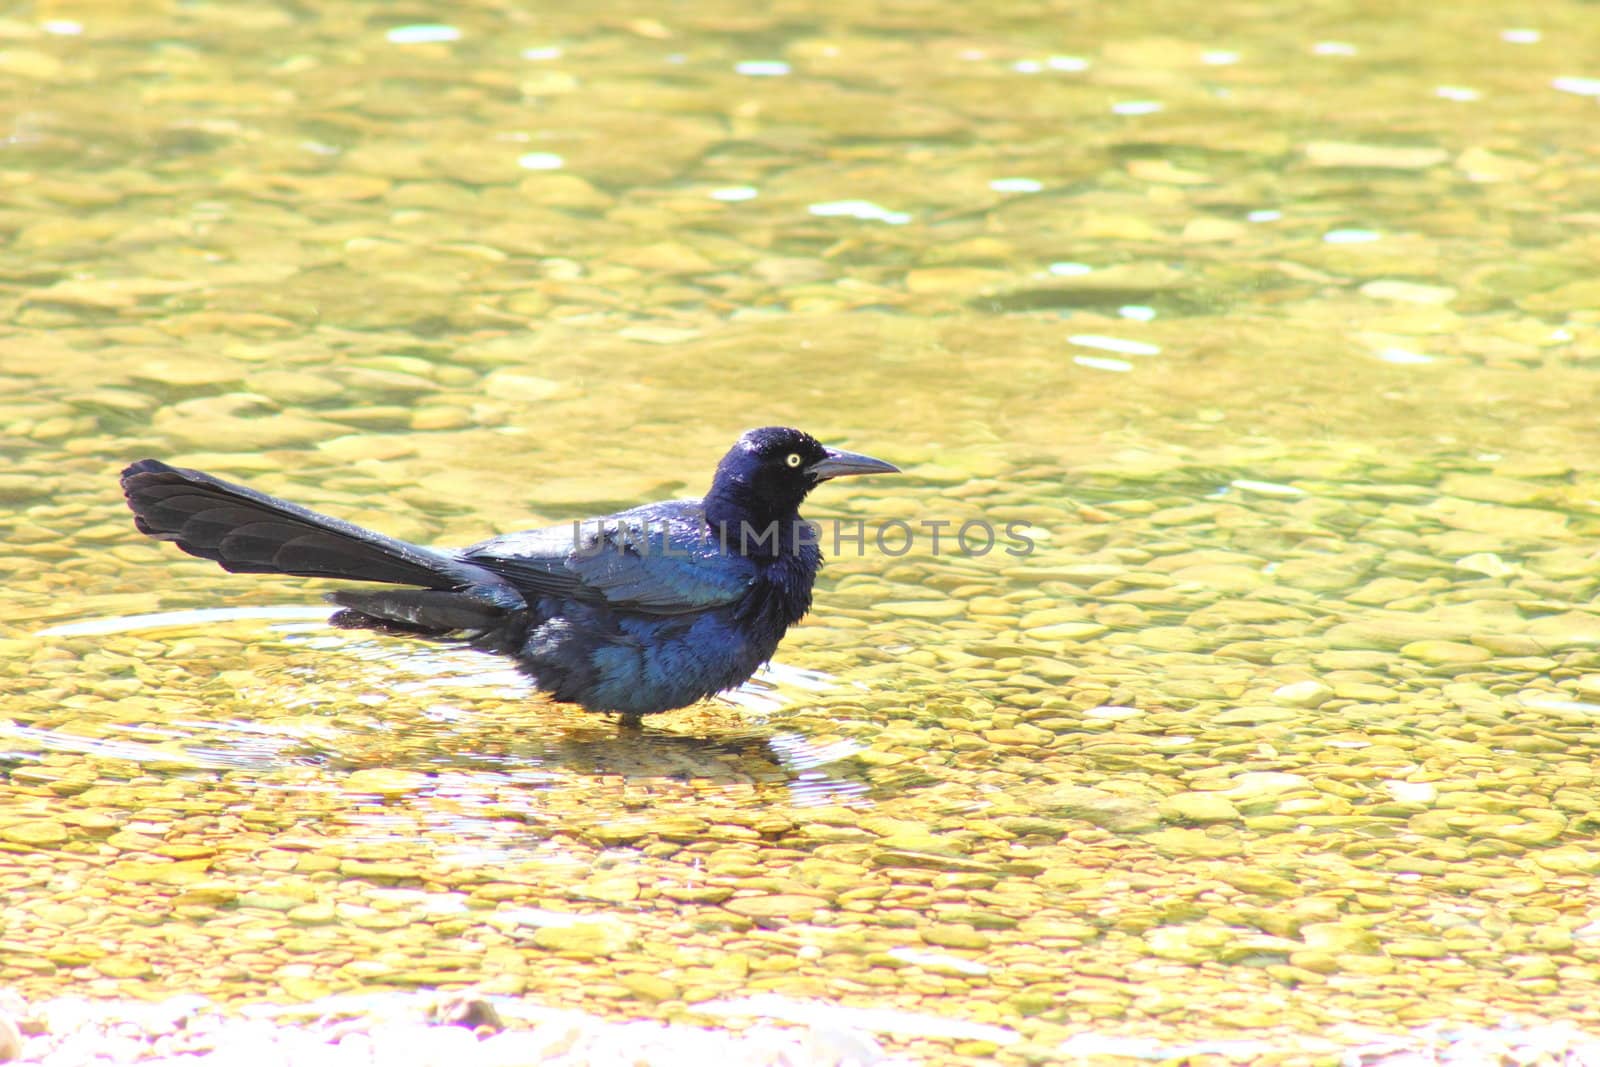 A Great-tailed grackle taking a bath in a shallow pond.